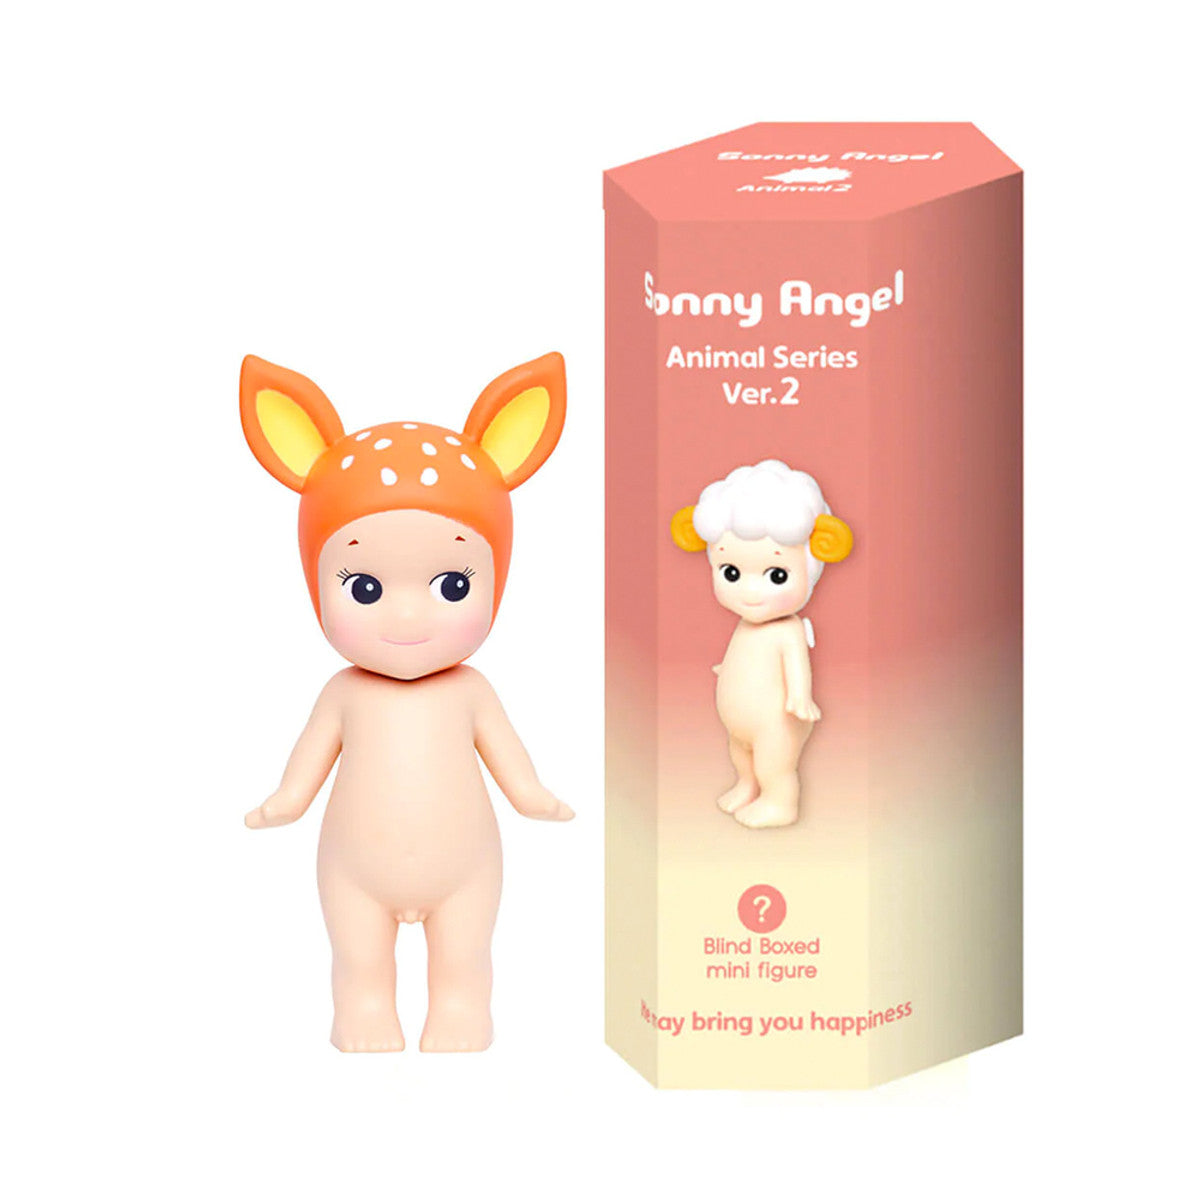 Sonny Angels Animal 2 - A Child's Delight